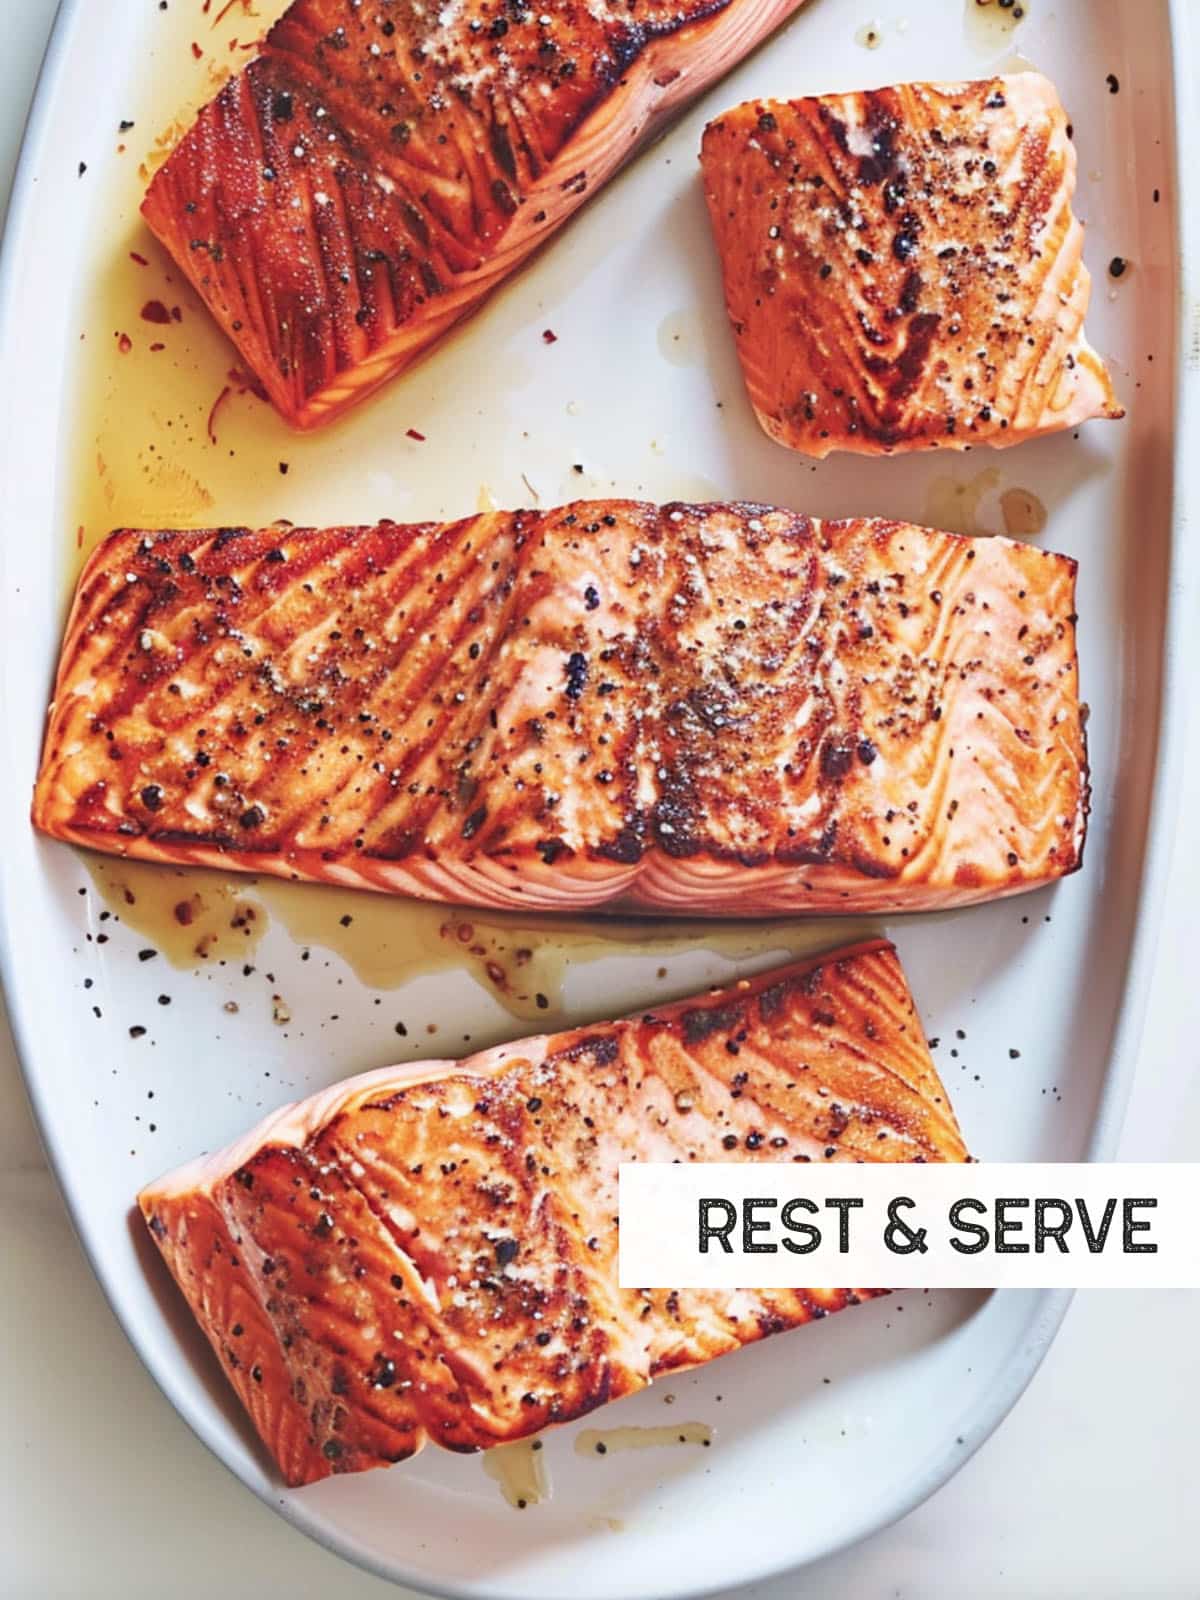 Grilled salmon plated with lemon wedges on the side.